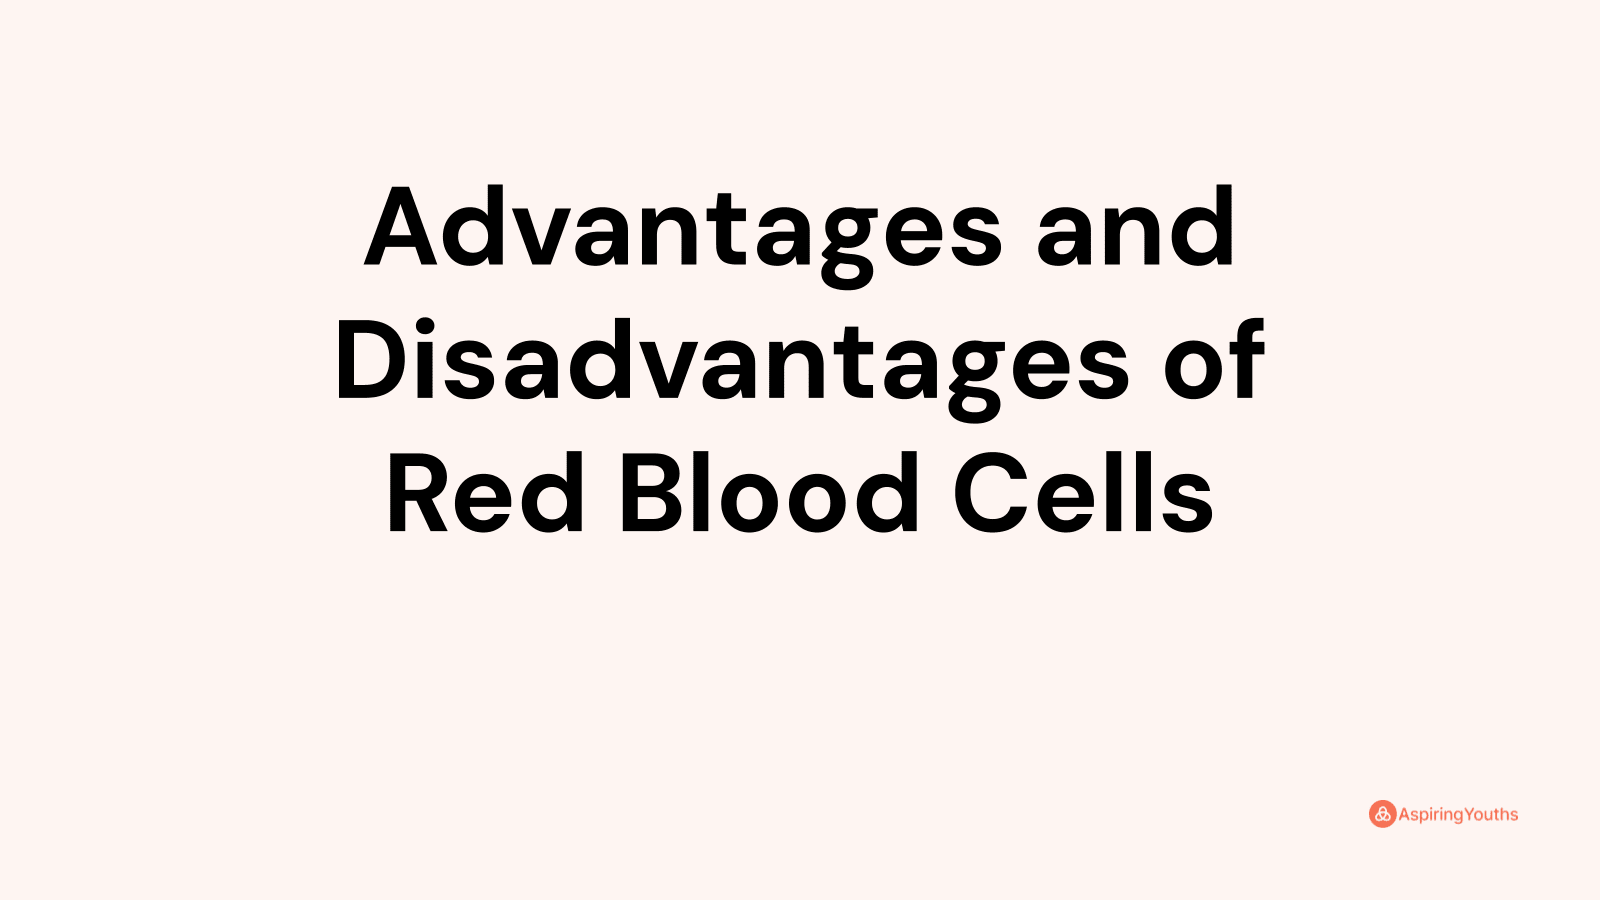 Advantages and disadvantages of Red Blood Cells